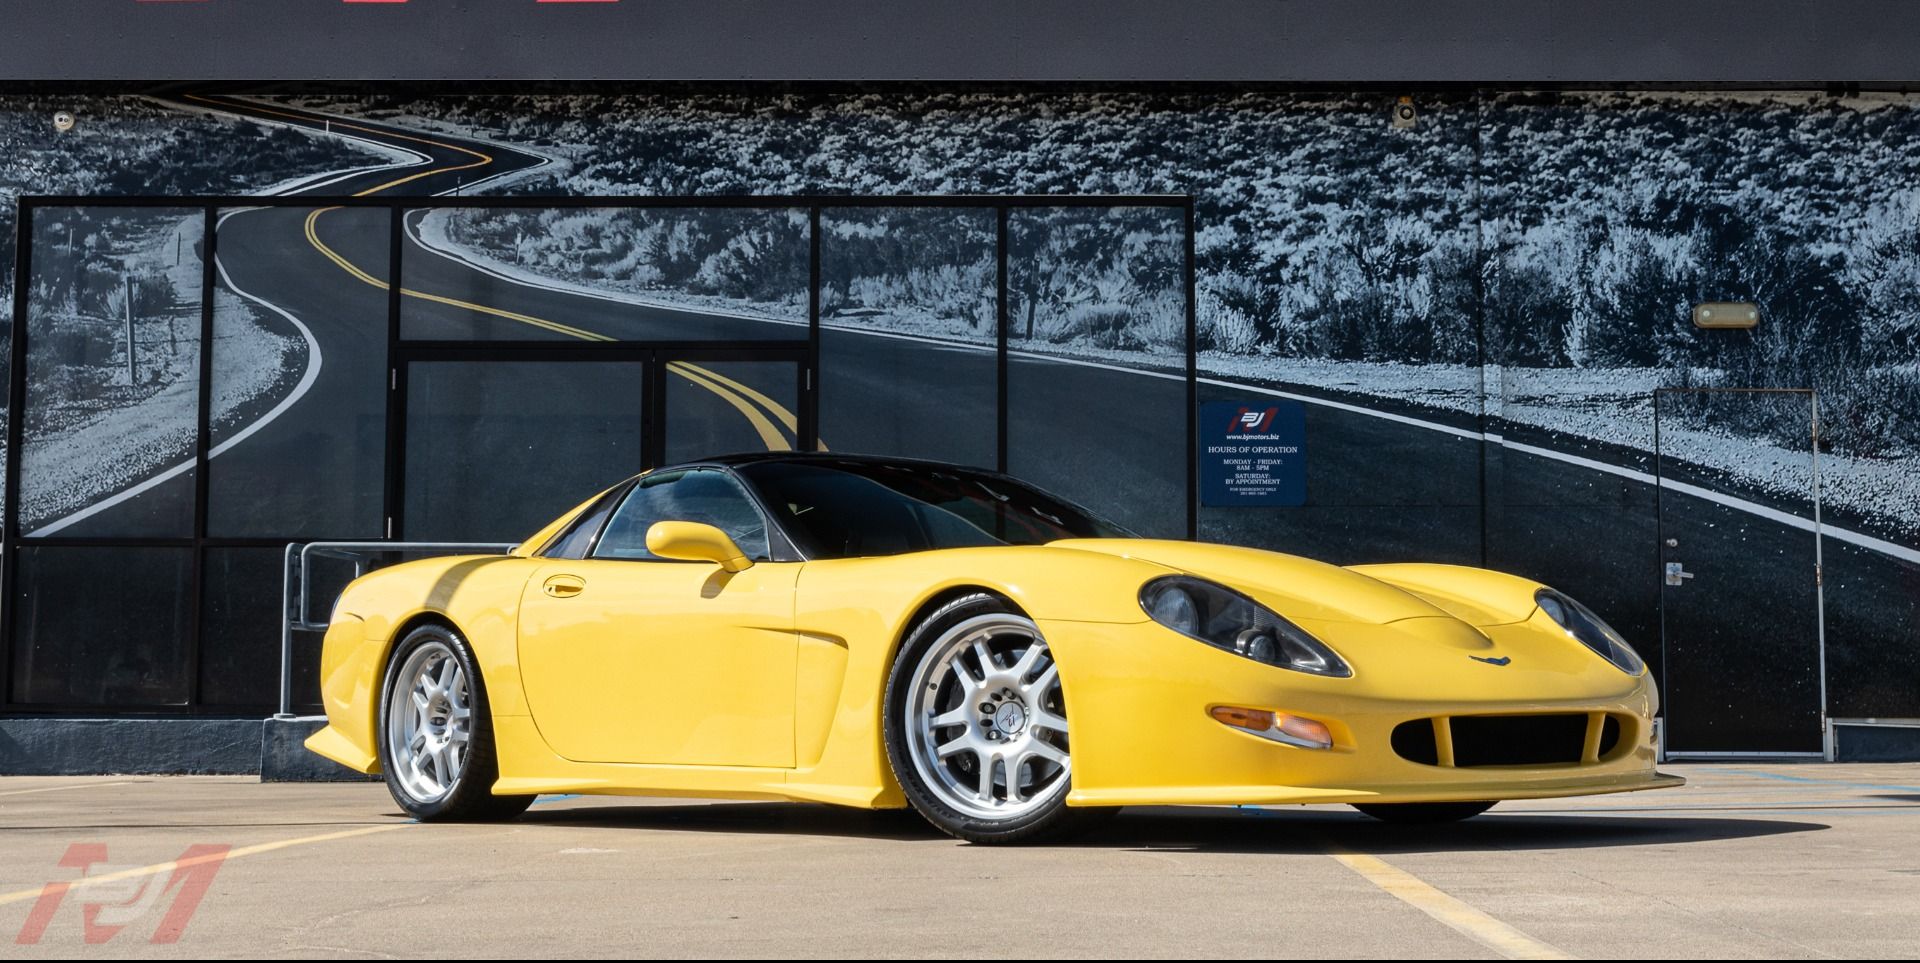 This Callaway C12 Is the Coolest C5 Corvette You Can Buy